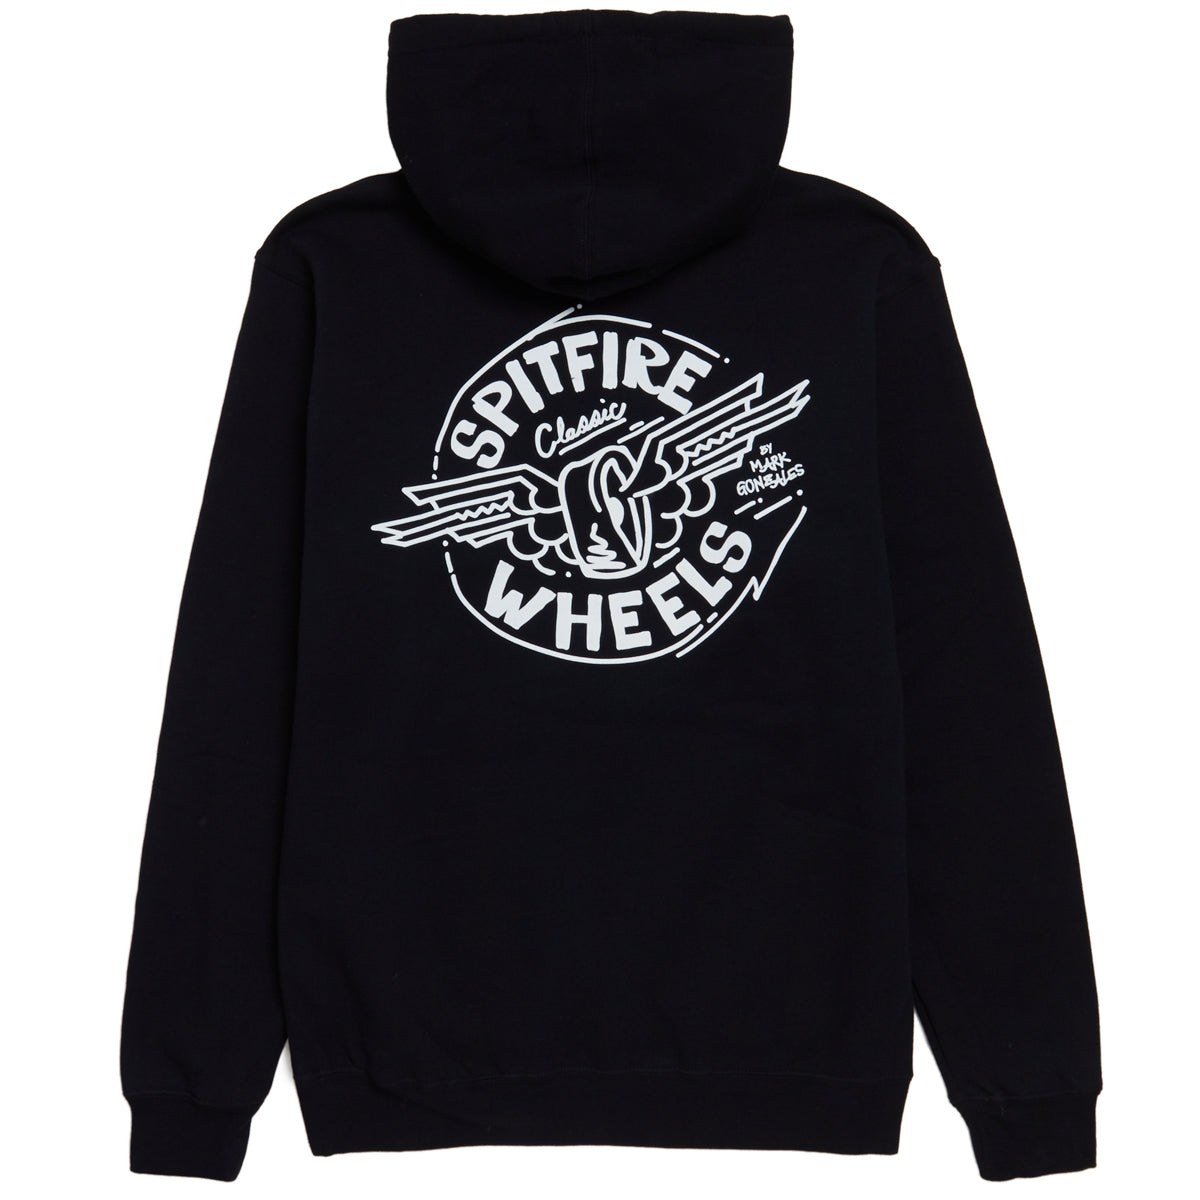 Spitfire Gonz Flying Classic Hoodie - Black image 1